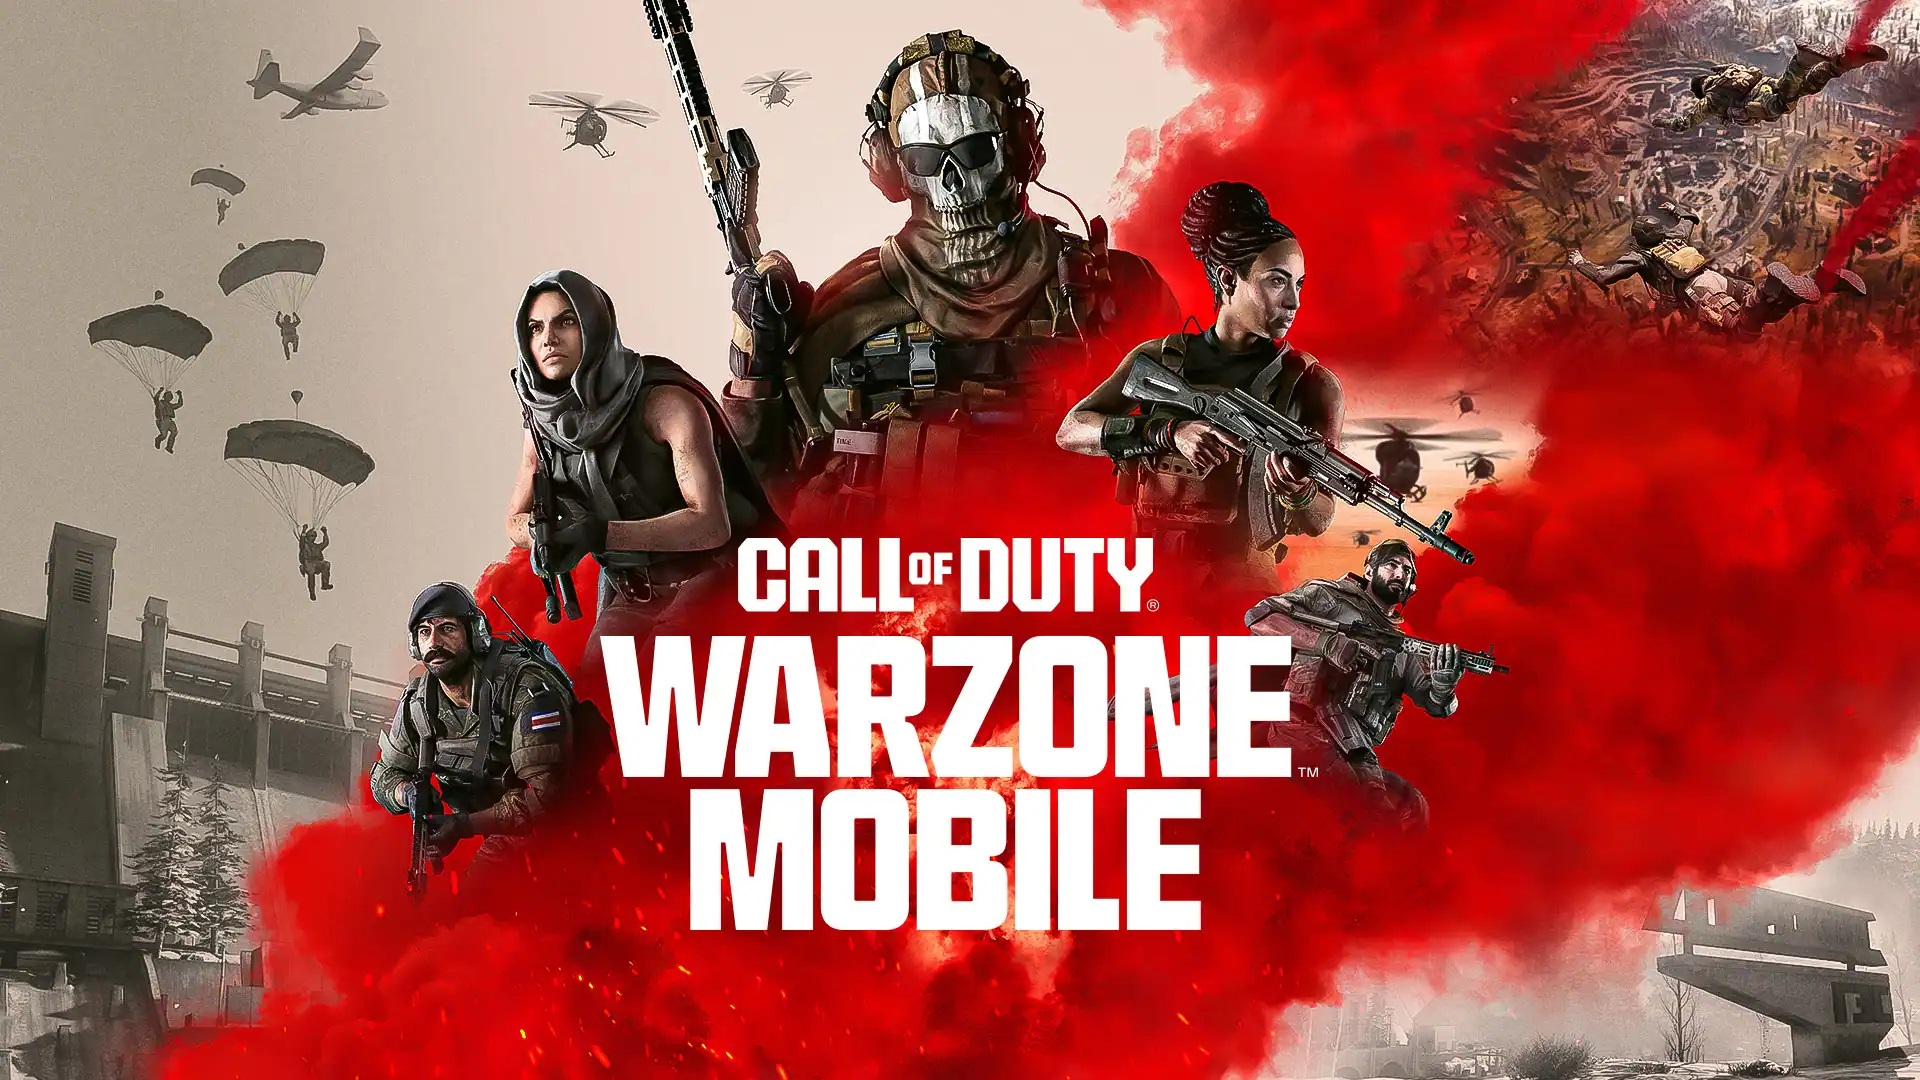 The official launch of Call of Duty: Warzone Mobile has taken place